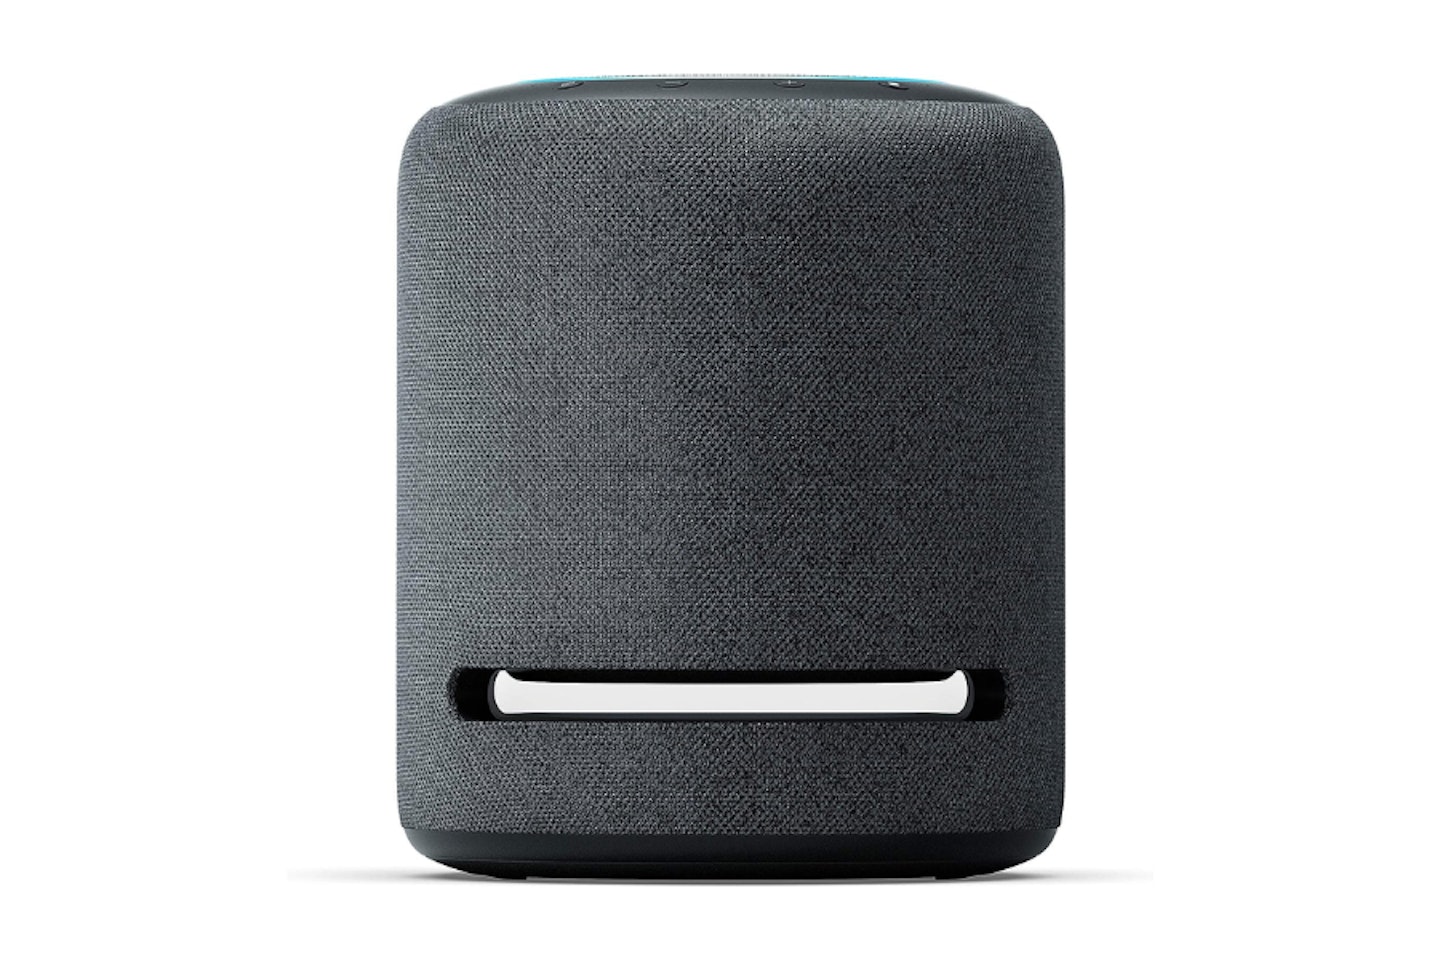 Echo Studio - Wi-Fi and Bluetooth smart speaker with Dolby Atmos, spatial audio, smart home hub and Alexa